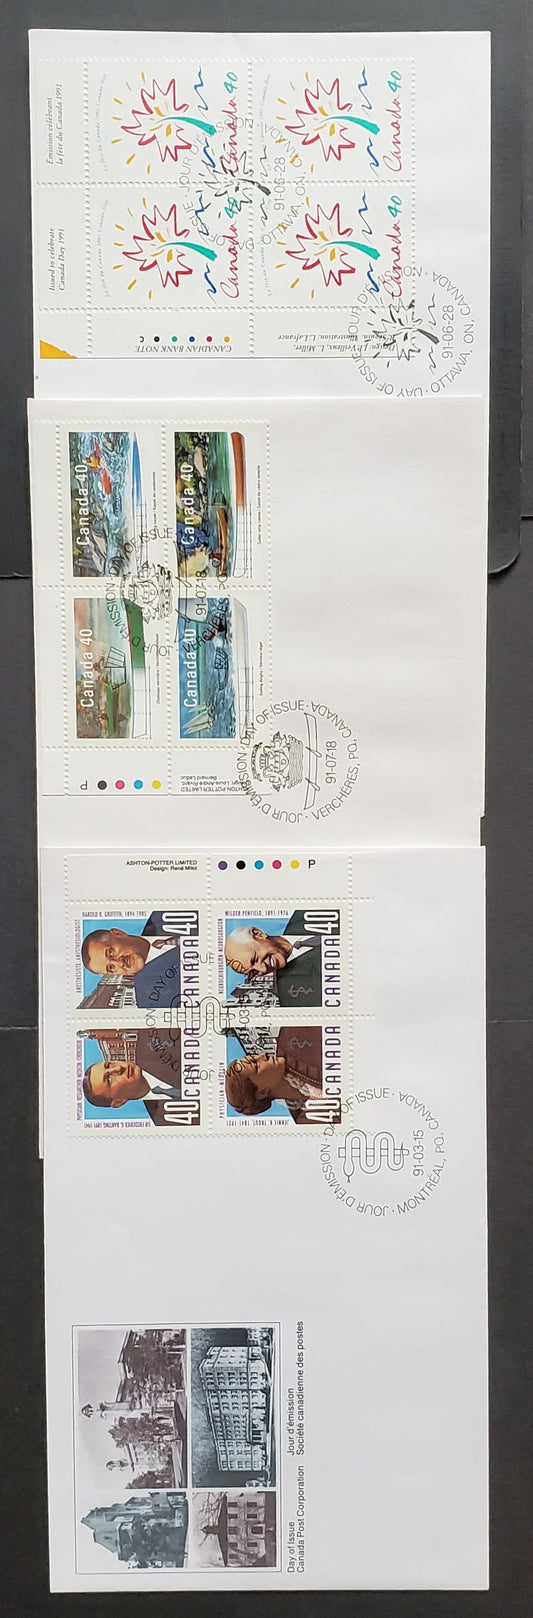 Lot 94 Canada #1305a, 1316, 1320a 40c Multicolor 1991 Doctors - Small Craft Issues, 3 Canada Post FDC's Franked With UL & LR Inscription Blocks, Approx 22,000 Of Each Produced, Cat. Value $10.65